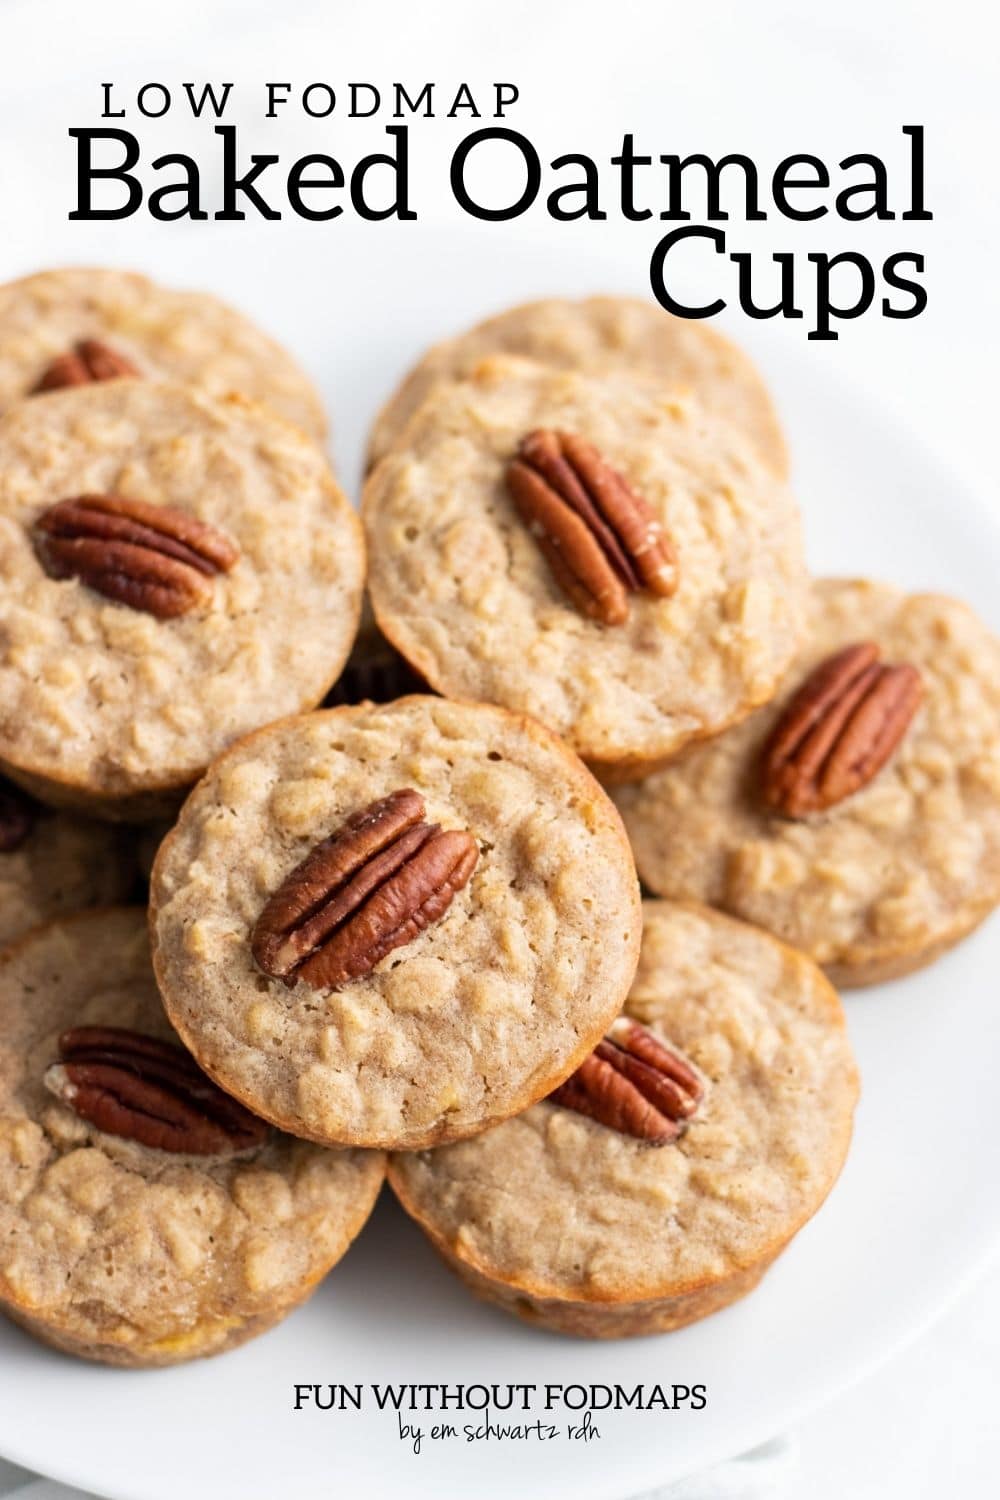 A plate of stacked baked oatmeal cups. Each has a pecan halve baked into the top. In the white space above the plate, black text reads "Low FODMAP Baked Oatmeal Cups."